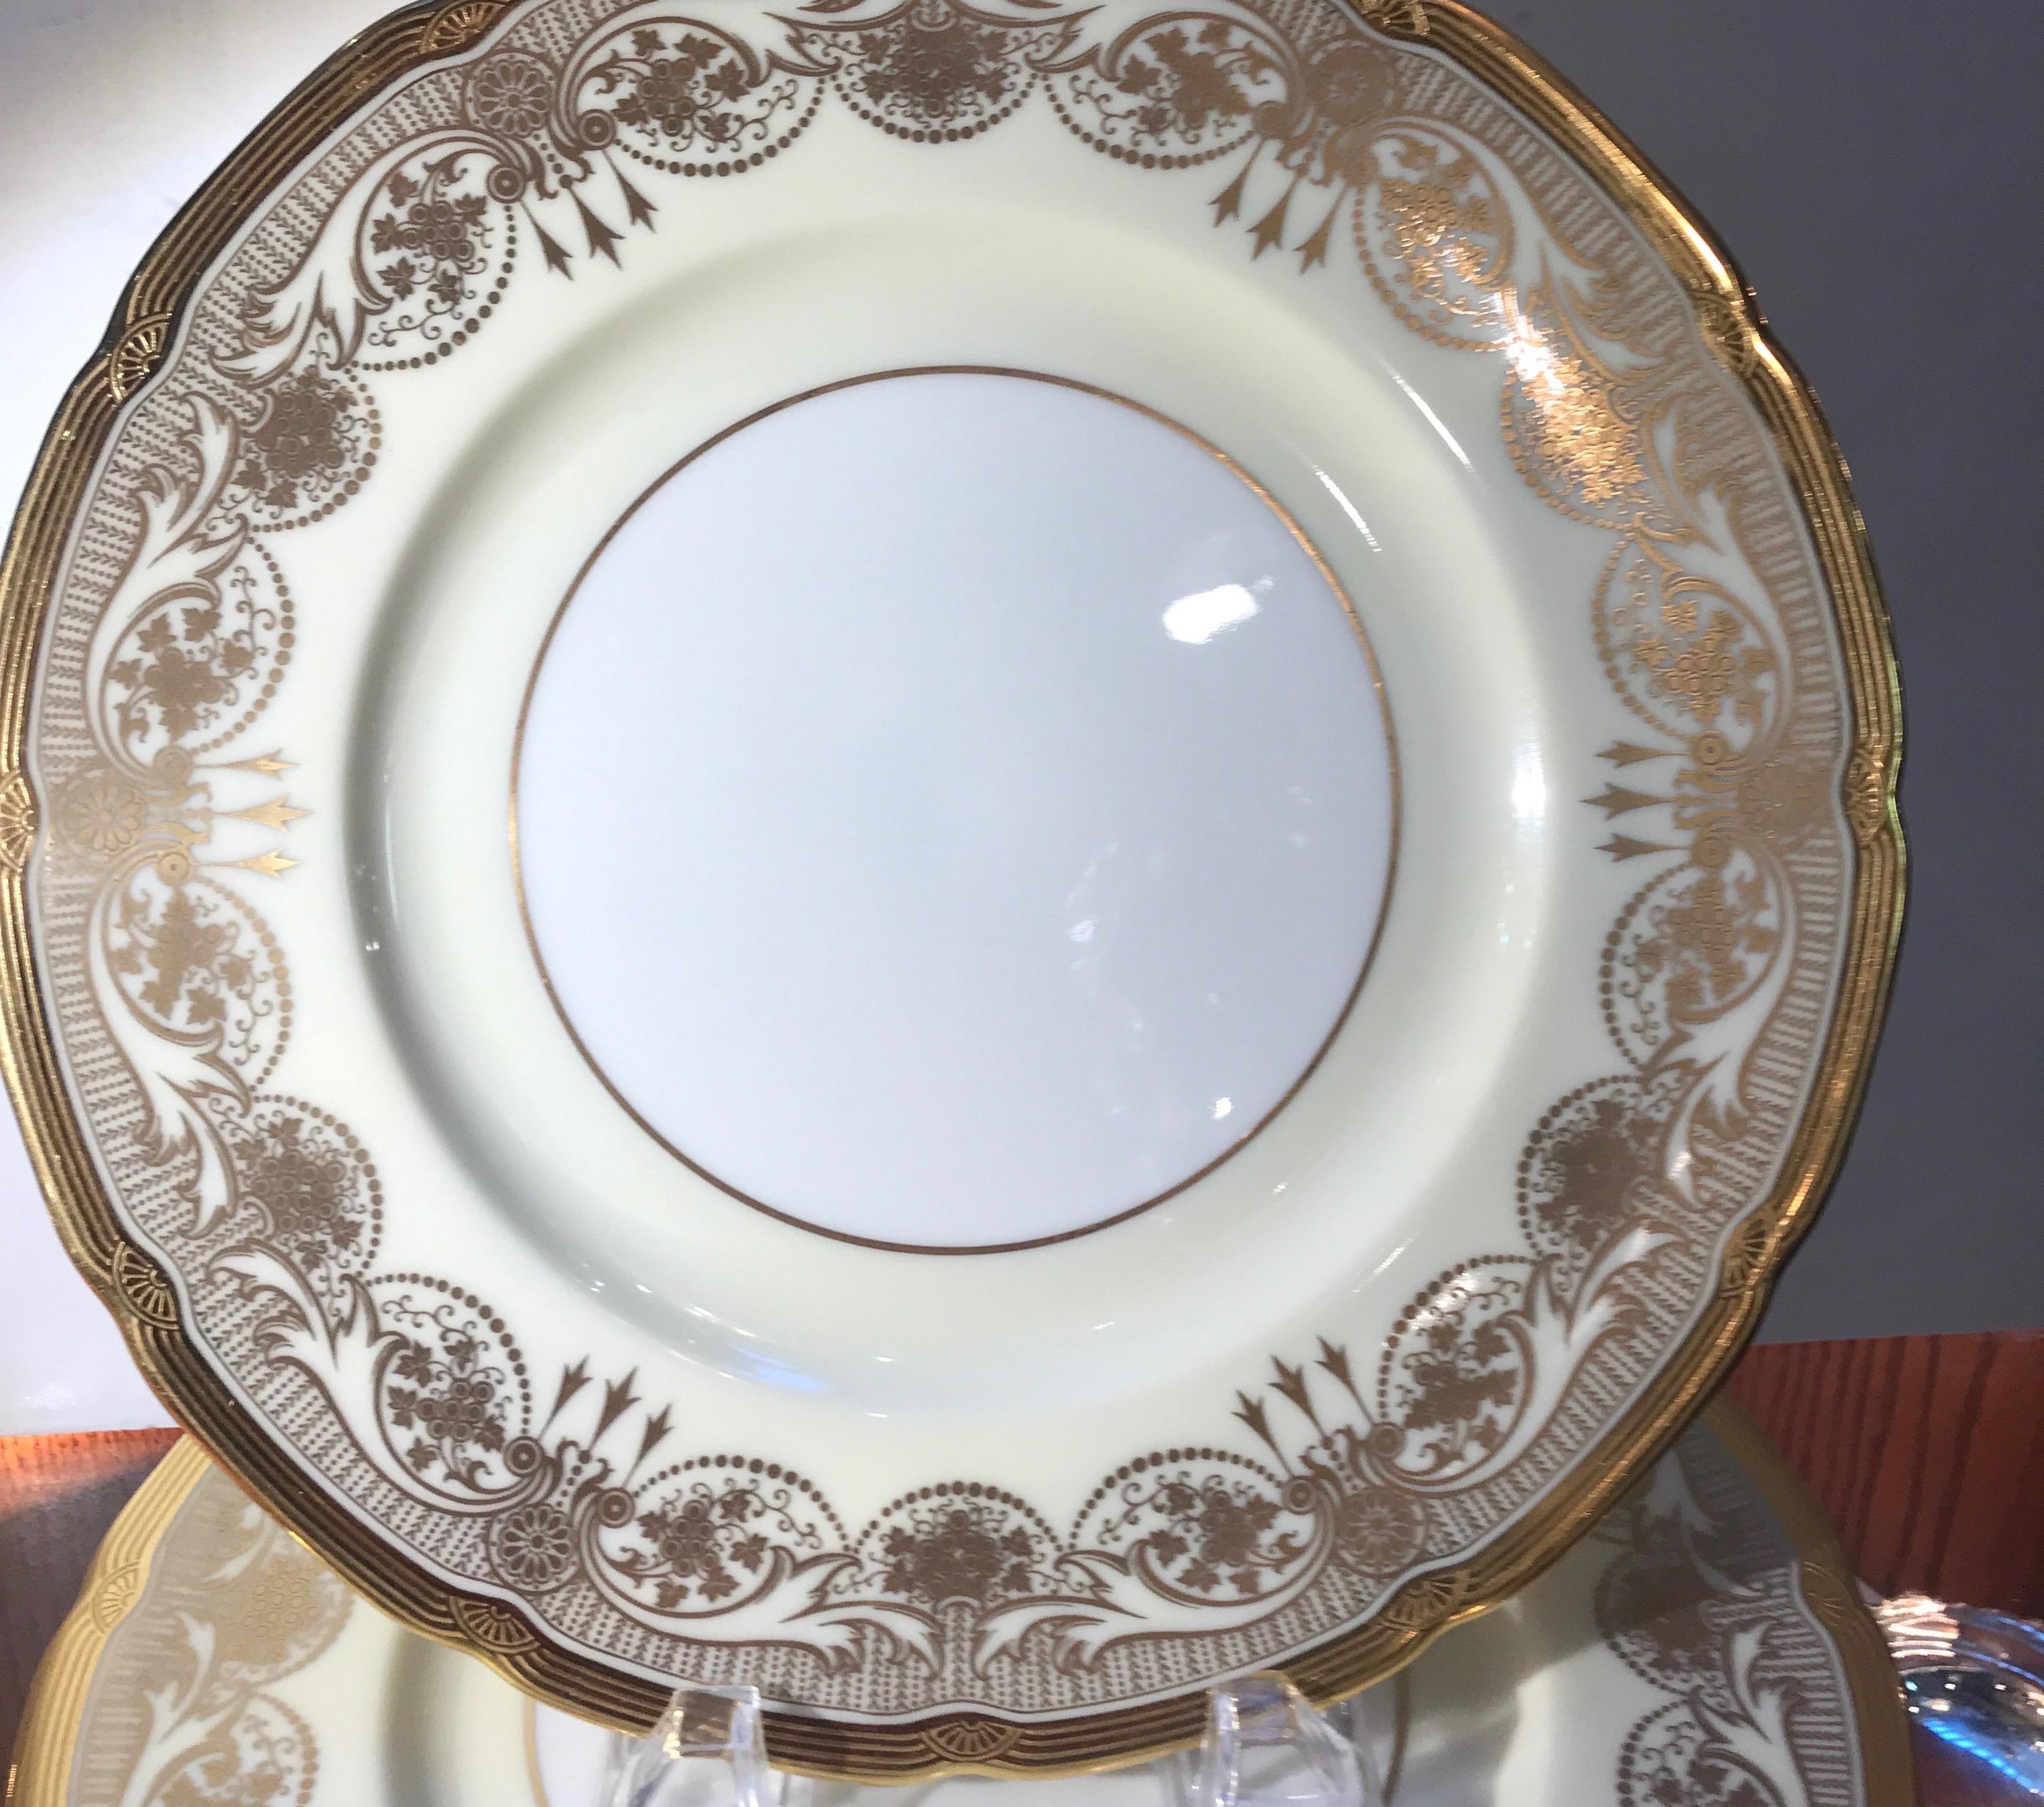 A Set of 12 elegant gold encrusted border dinner service plates. Each one with a fancy detailed gold border on a light vanilla cream background with an ivory white center. Marked on the back with an early Lenox green mark from 1930 or before. The